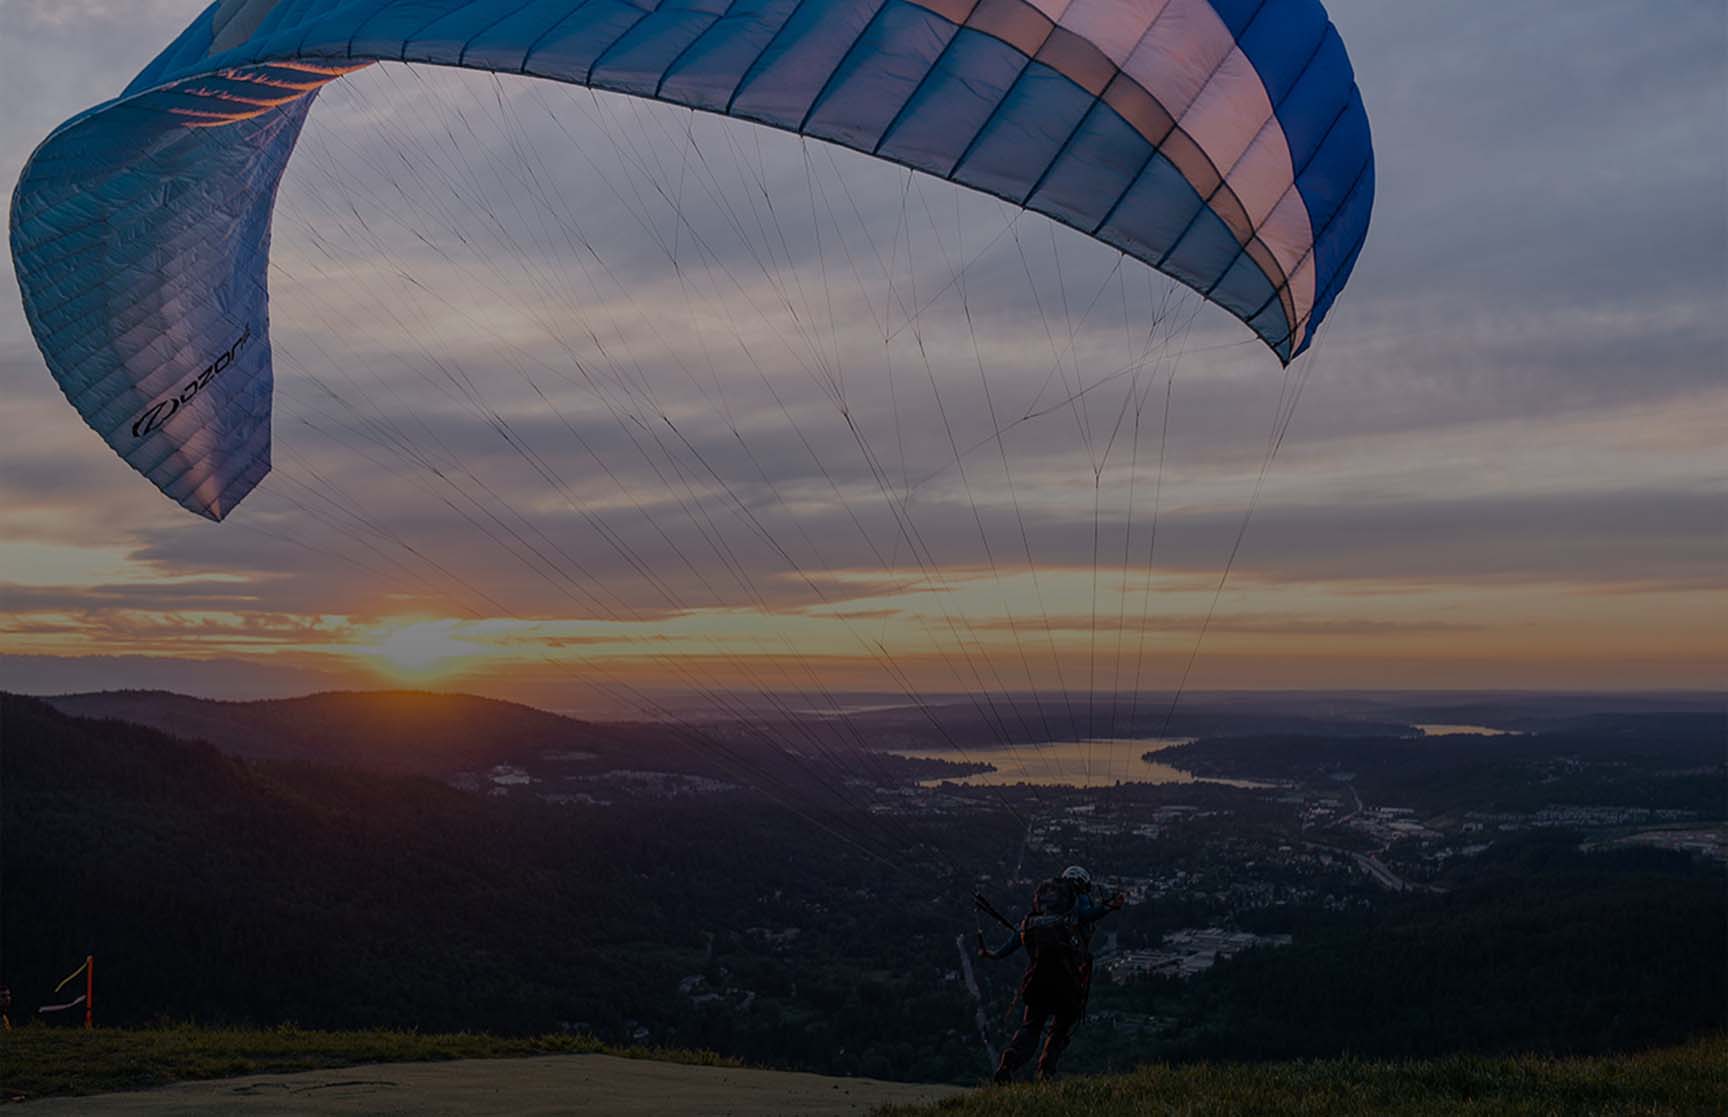 Outdoor adventures in Issaquah - Poo Poo Point paragliding